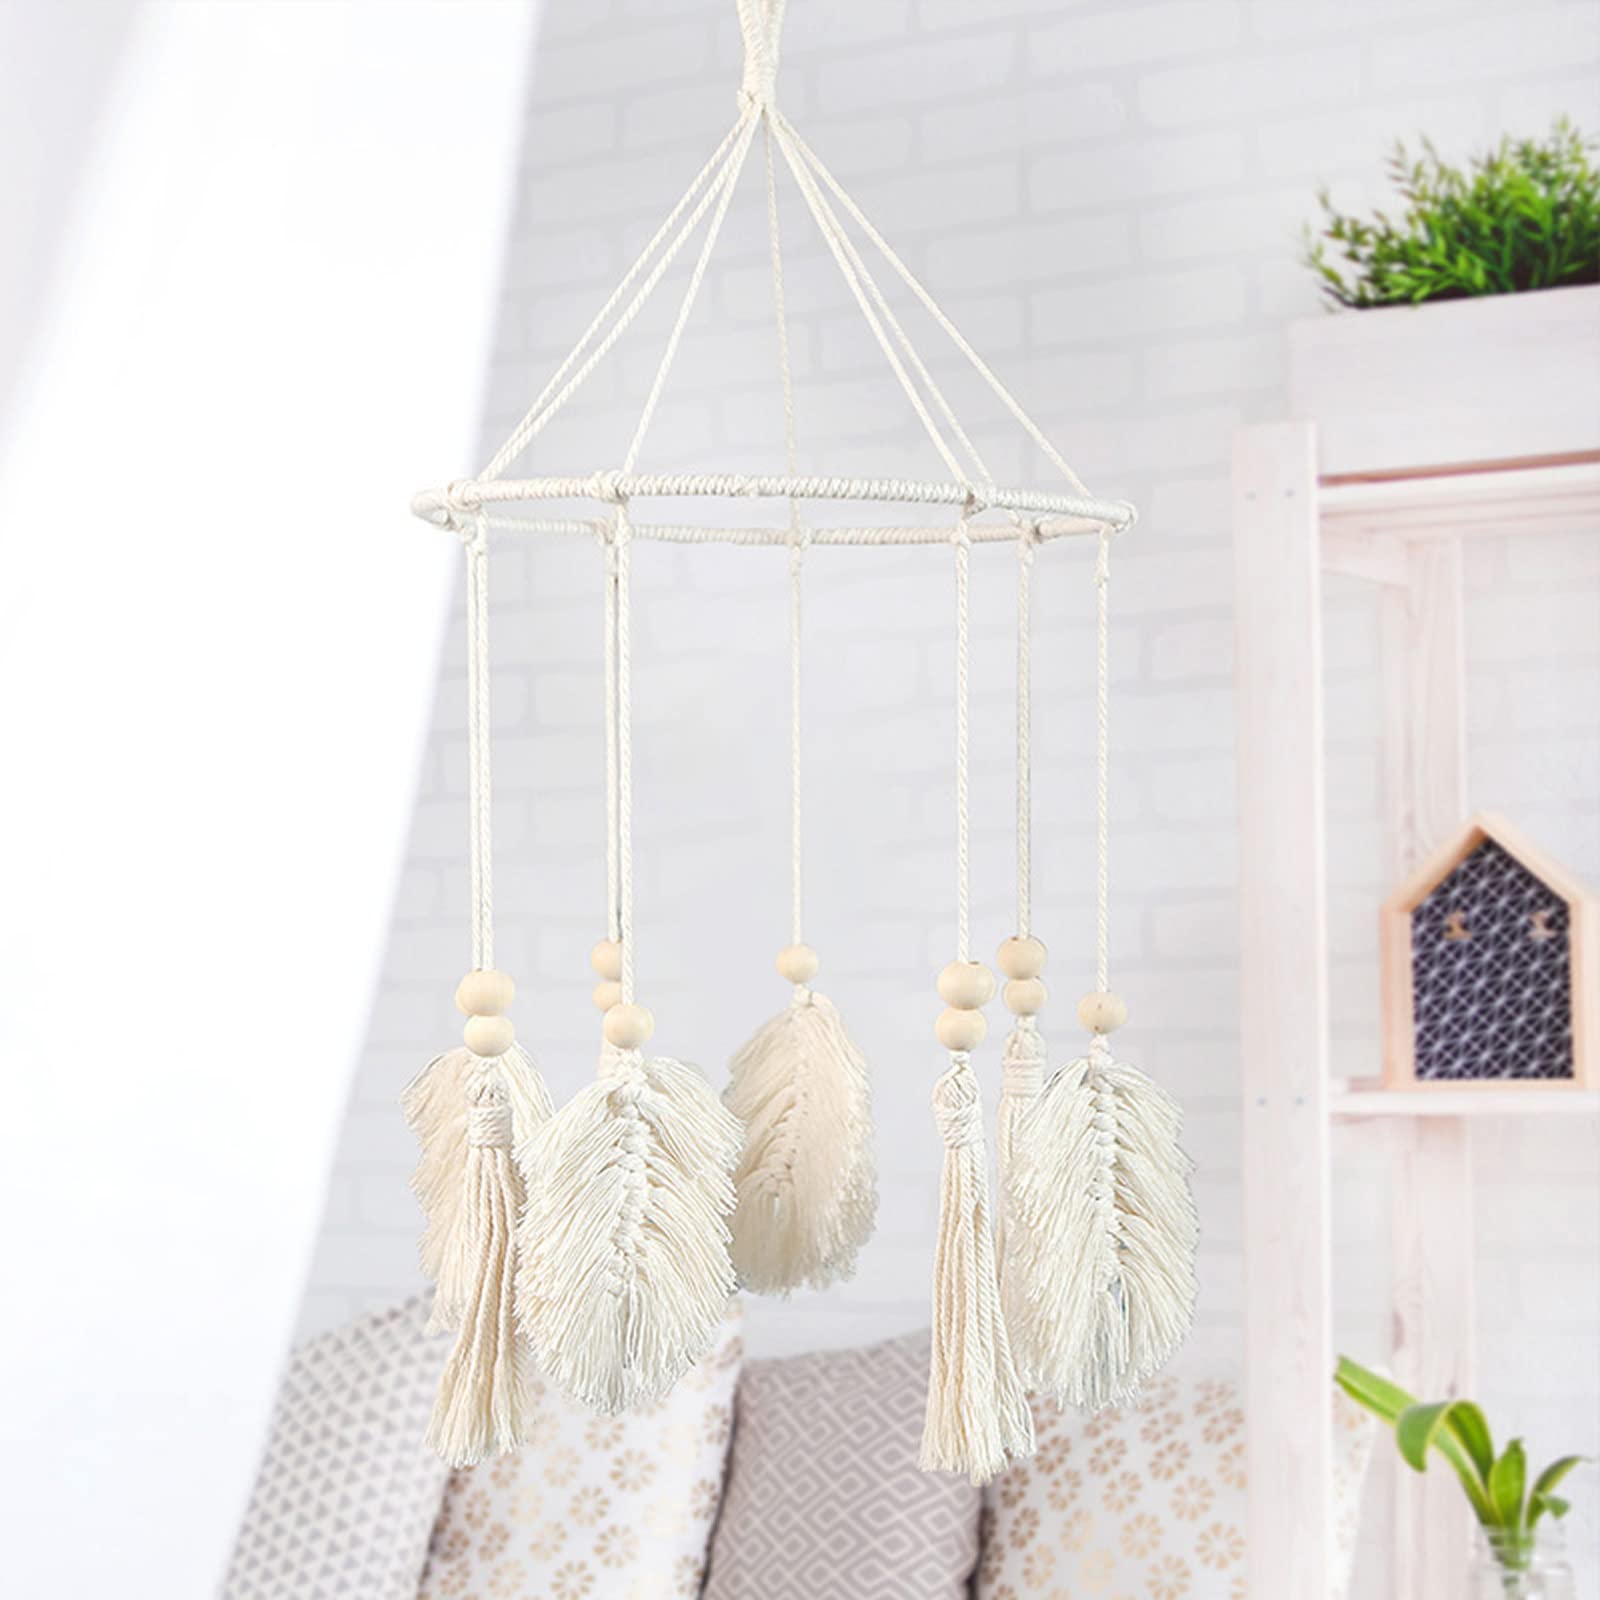 Bohemian Crib Mobile Cotton Woven Macrame Small Boho Dreamcatcher Tapastry Baby Bed Mobile Toys Hanging Wooden Nursery Decor for Girls,Baby Room Crib Bed